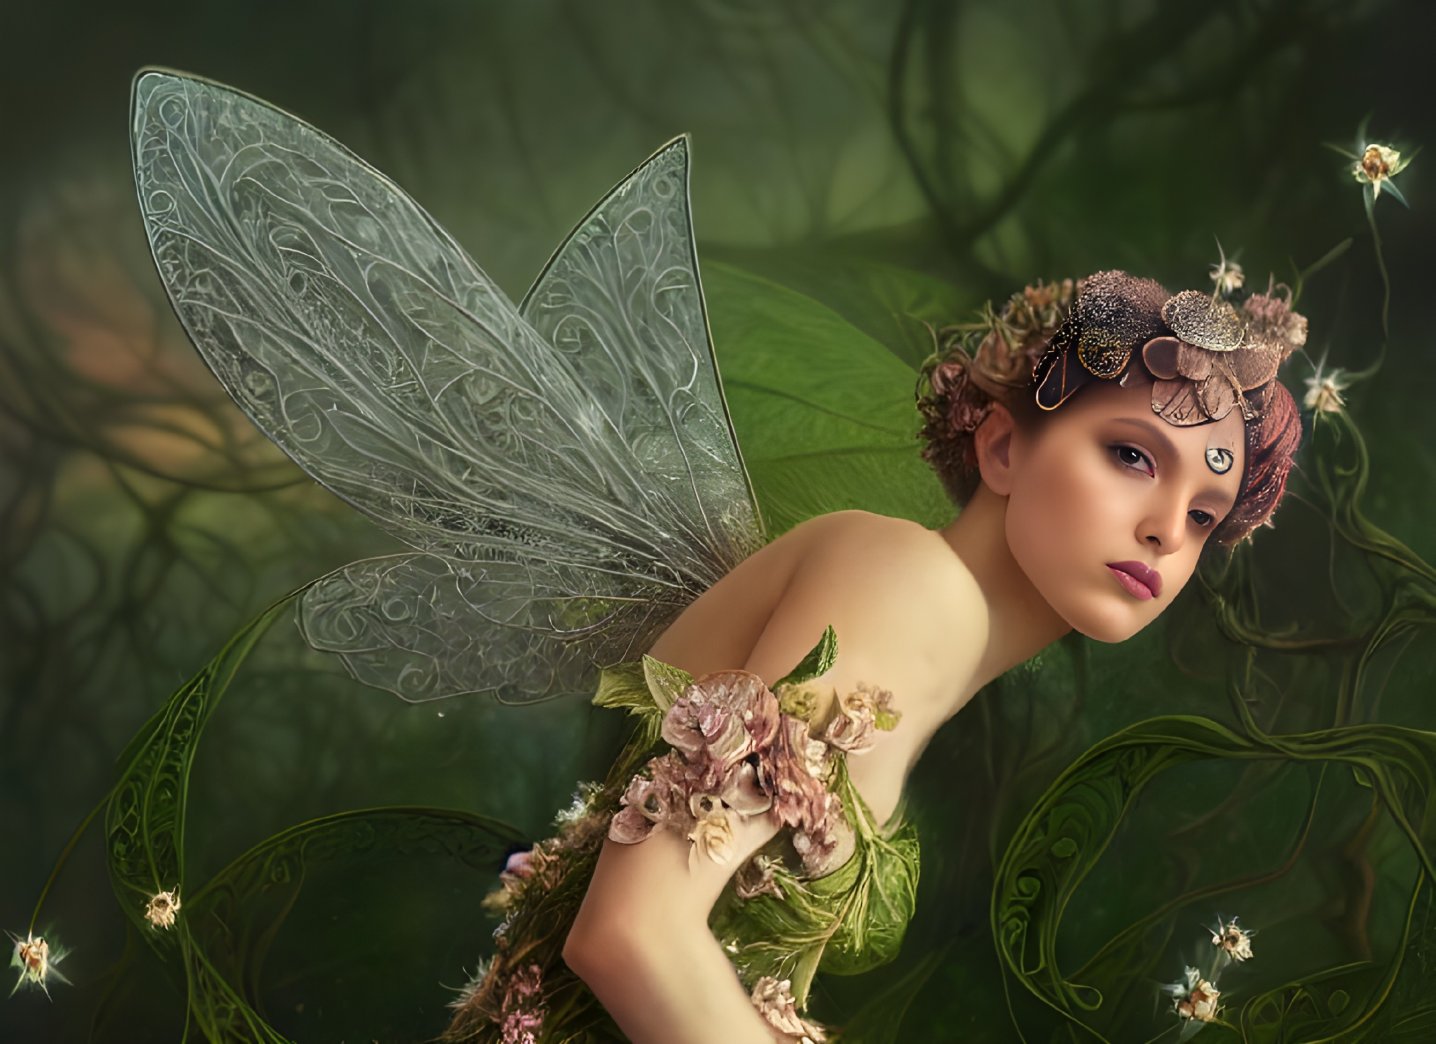 Delicate woman with translucent fairy wings in dreamy floral scene